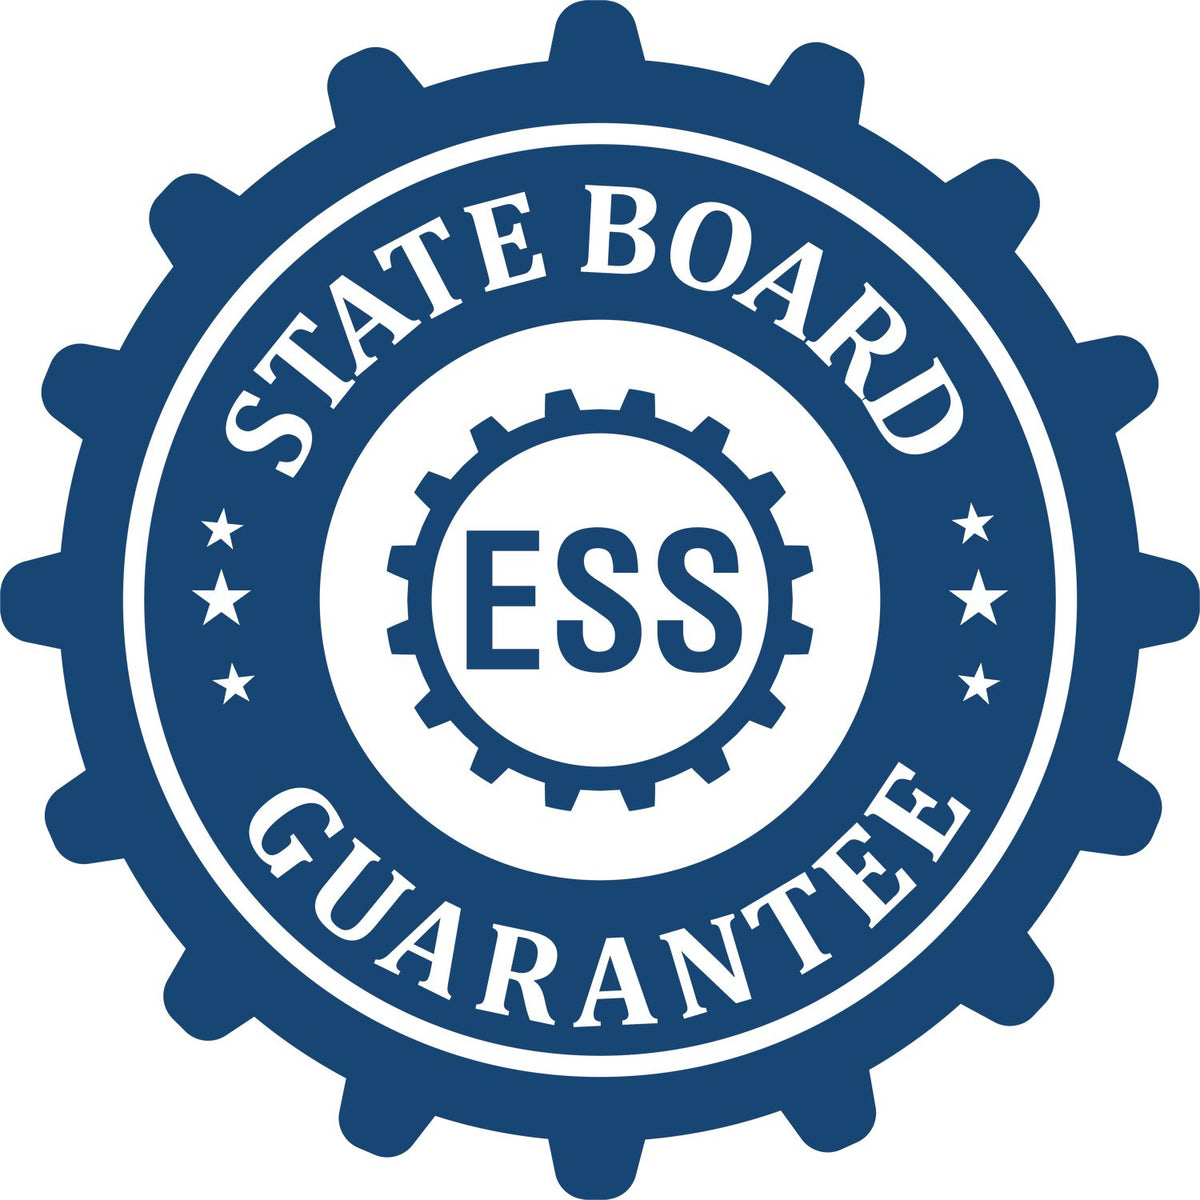 An emblem in a gear shape illustrating a state board guarantee for the Alabama Desk Architect Embossing Seal product.